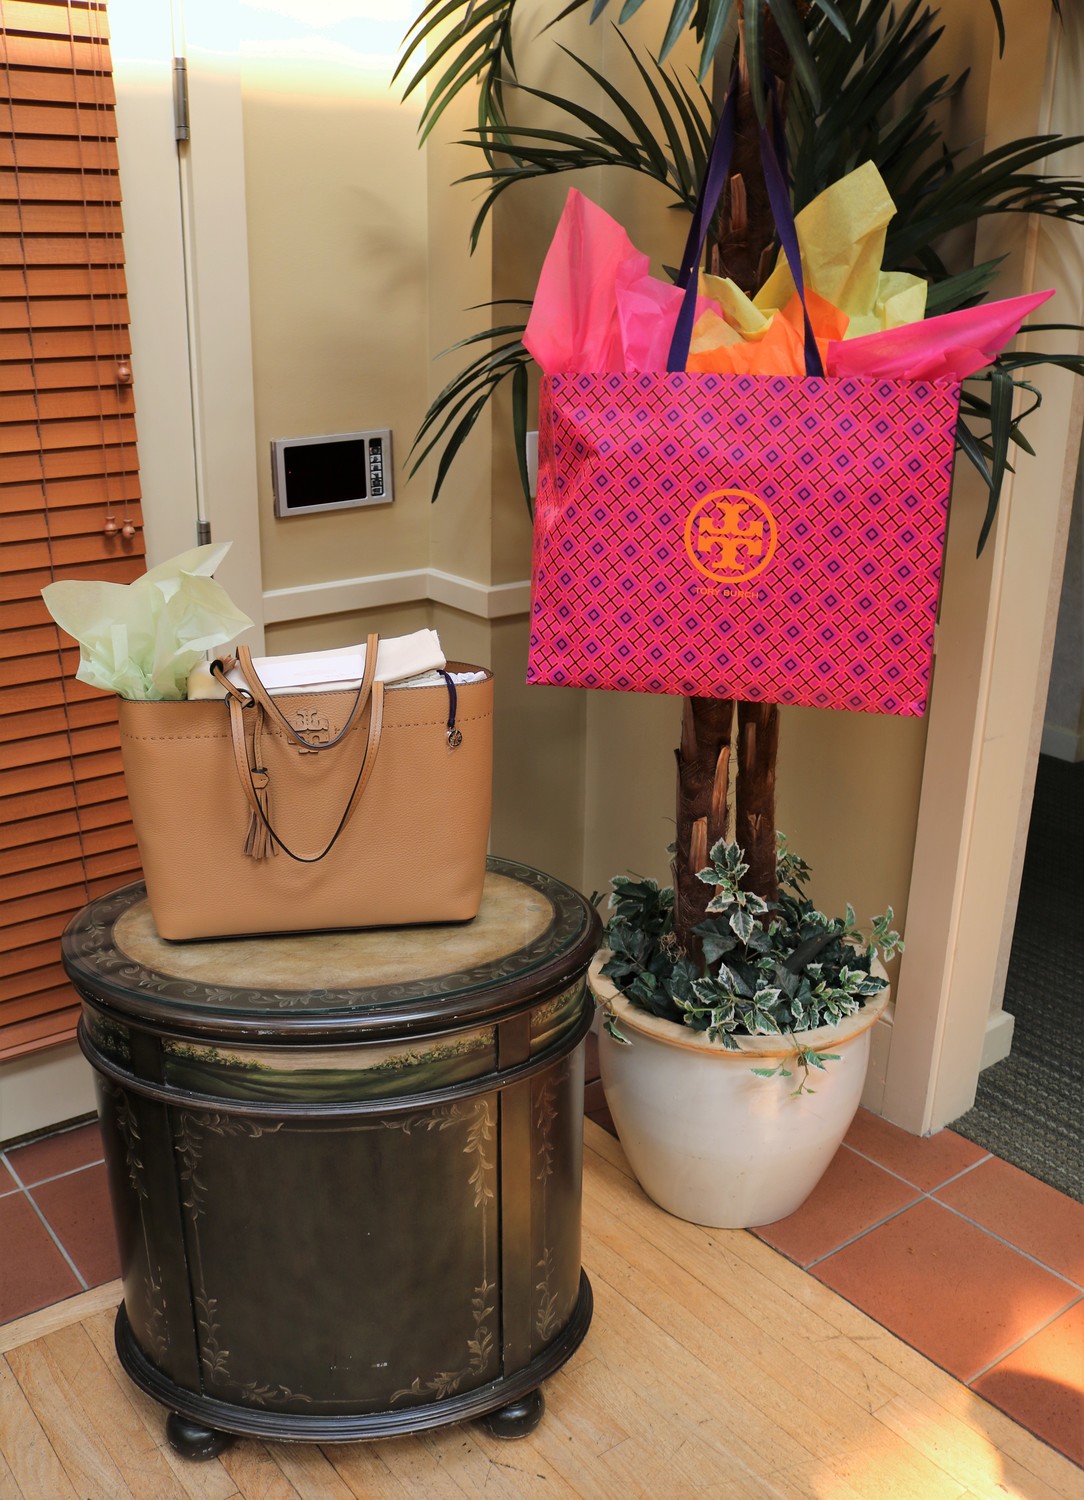 A tote bag by designer Tory Burch was the raffle prize at the Cultural Center at Ponte Vedra Beach’s 6th annual Bag Lady Luncheon.